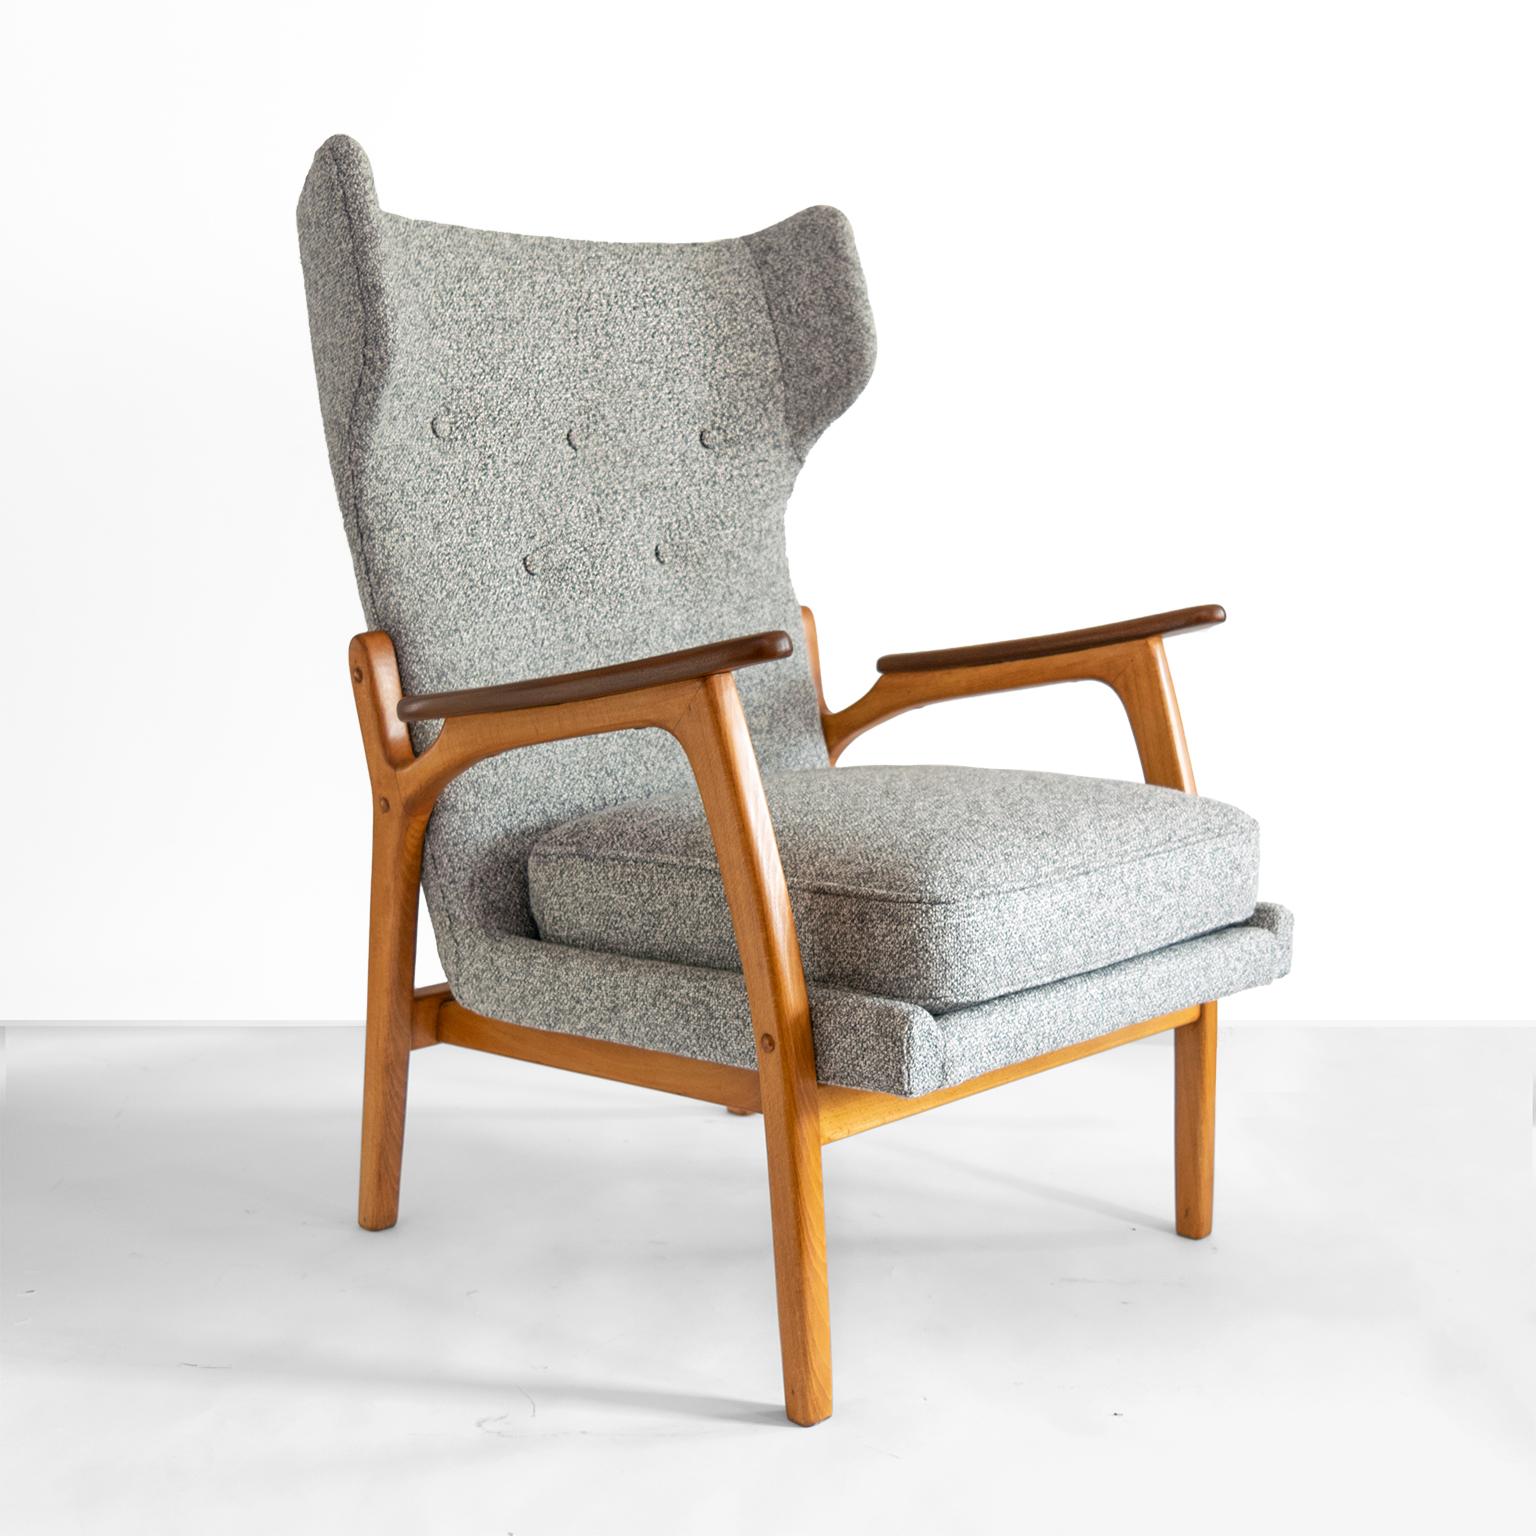 An elegant Scandinavian Modern wingback chair with a solid beech wood frame and detailed with teak armrest. Newly upholstered with a gray tweed like fabric. 

Measures: Height 40“ x Seat height 19“ x Width 27 “ x Depth 28“.